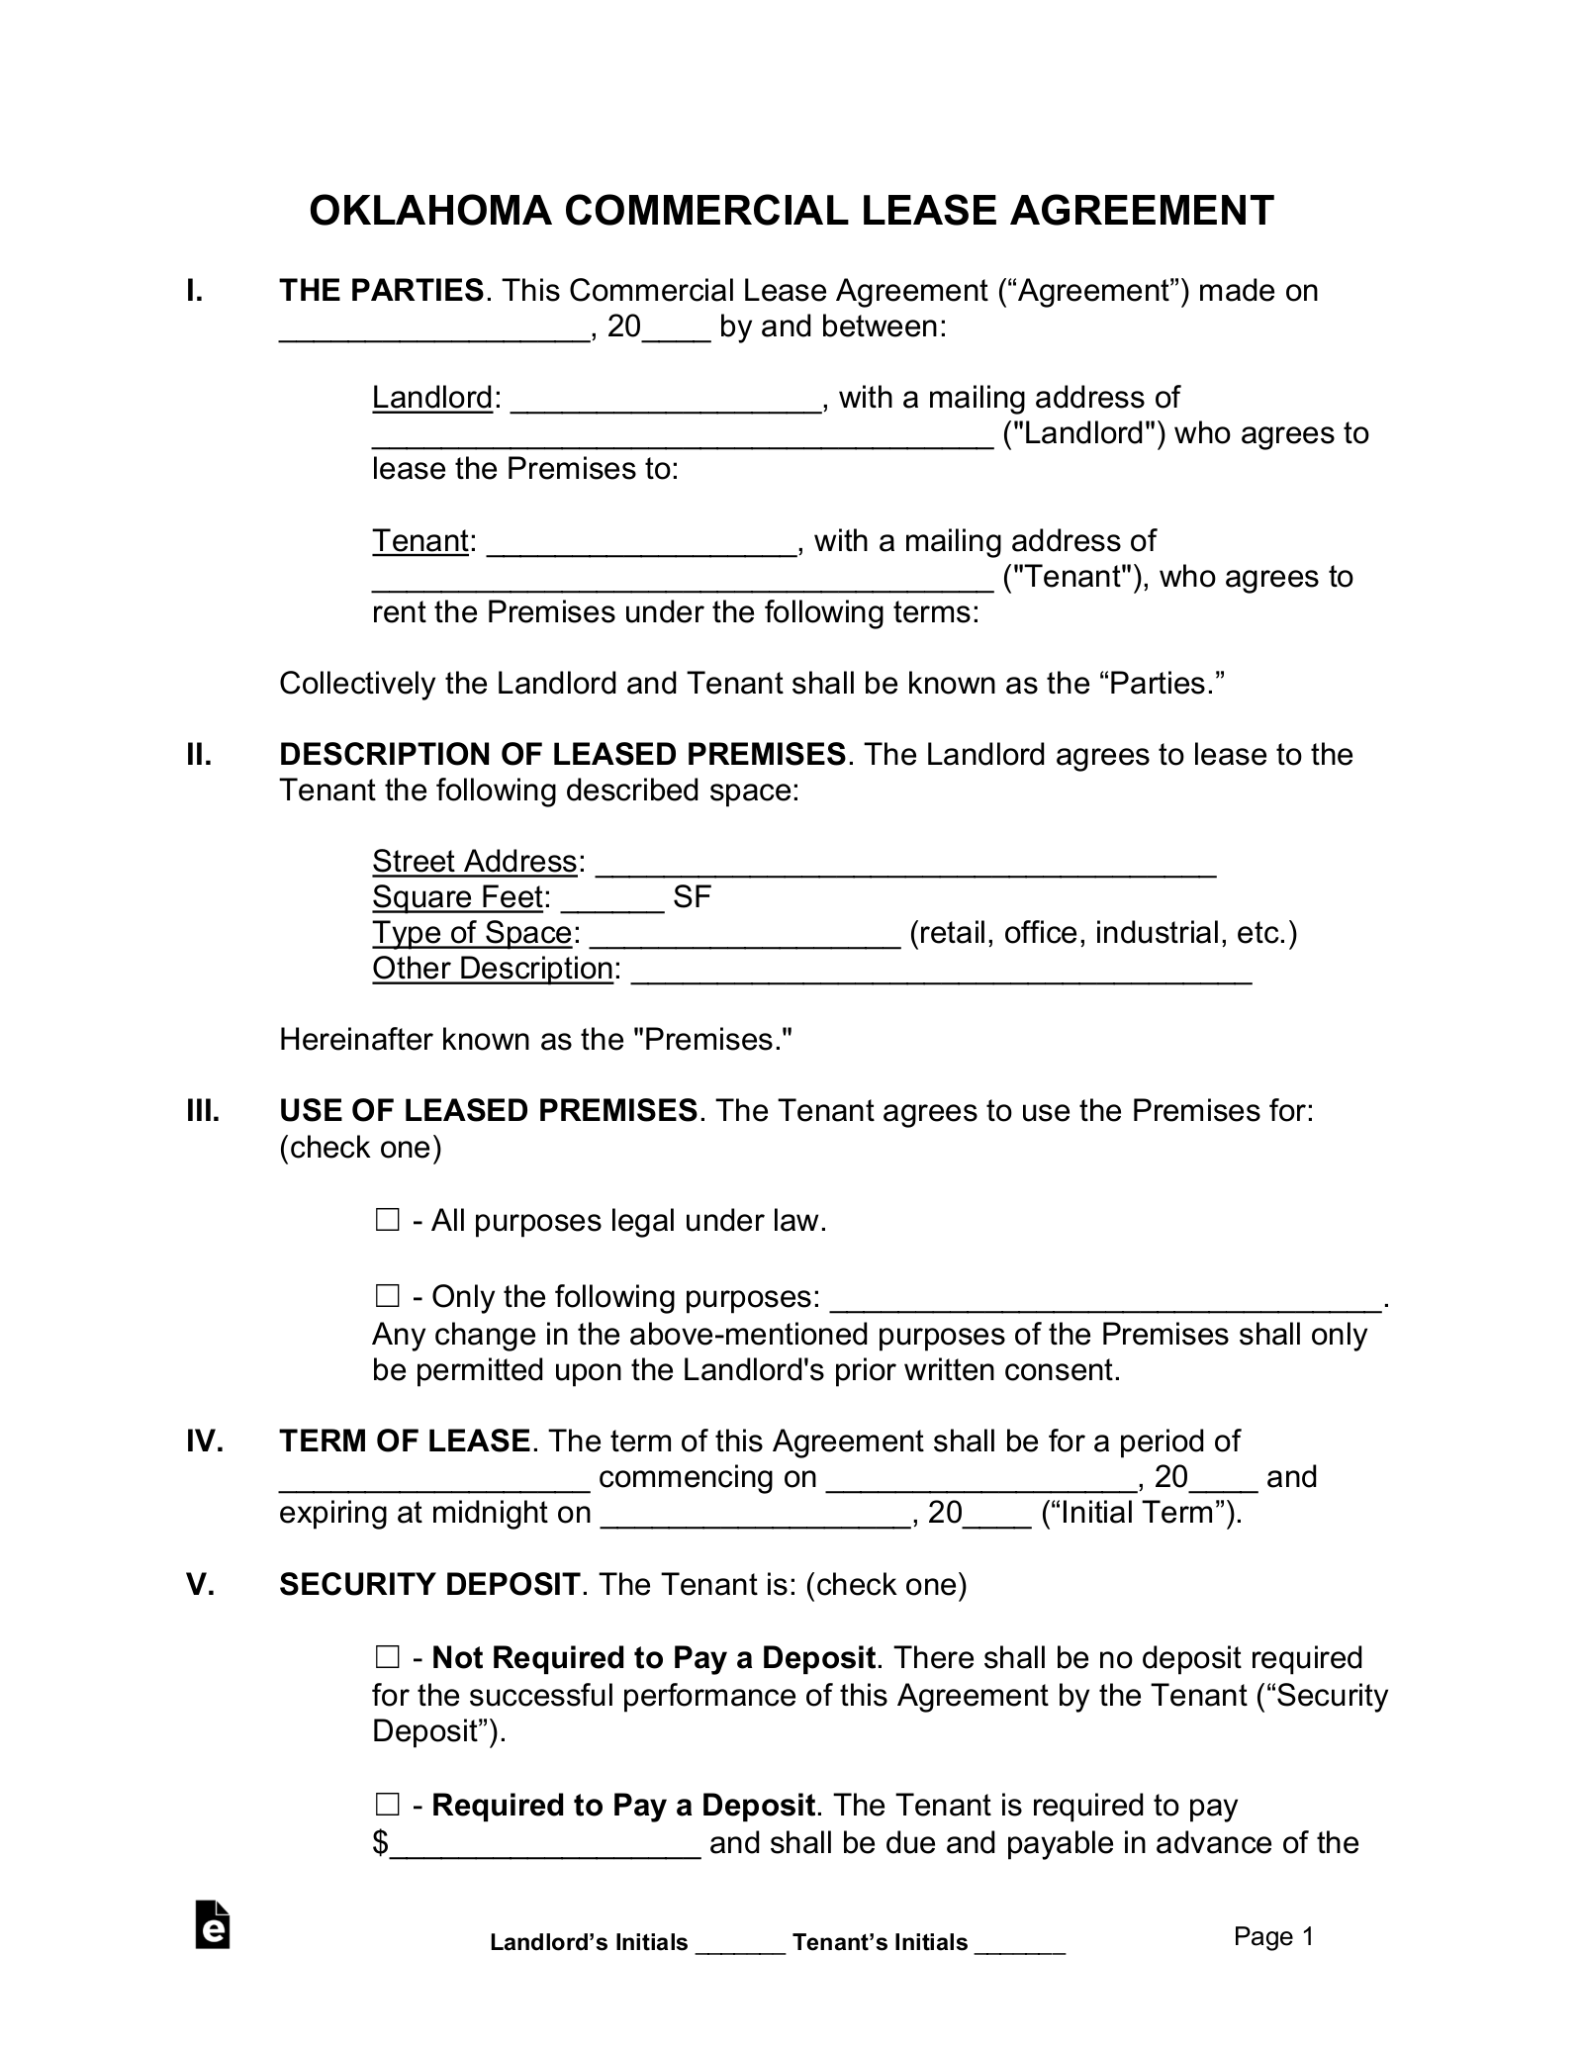 free-oklahoma-commercial-lease-agreement-form-pdf-word-eforms